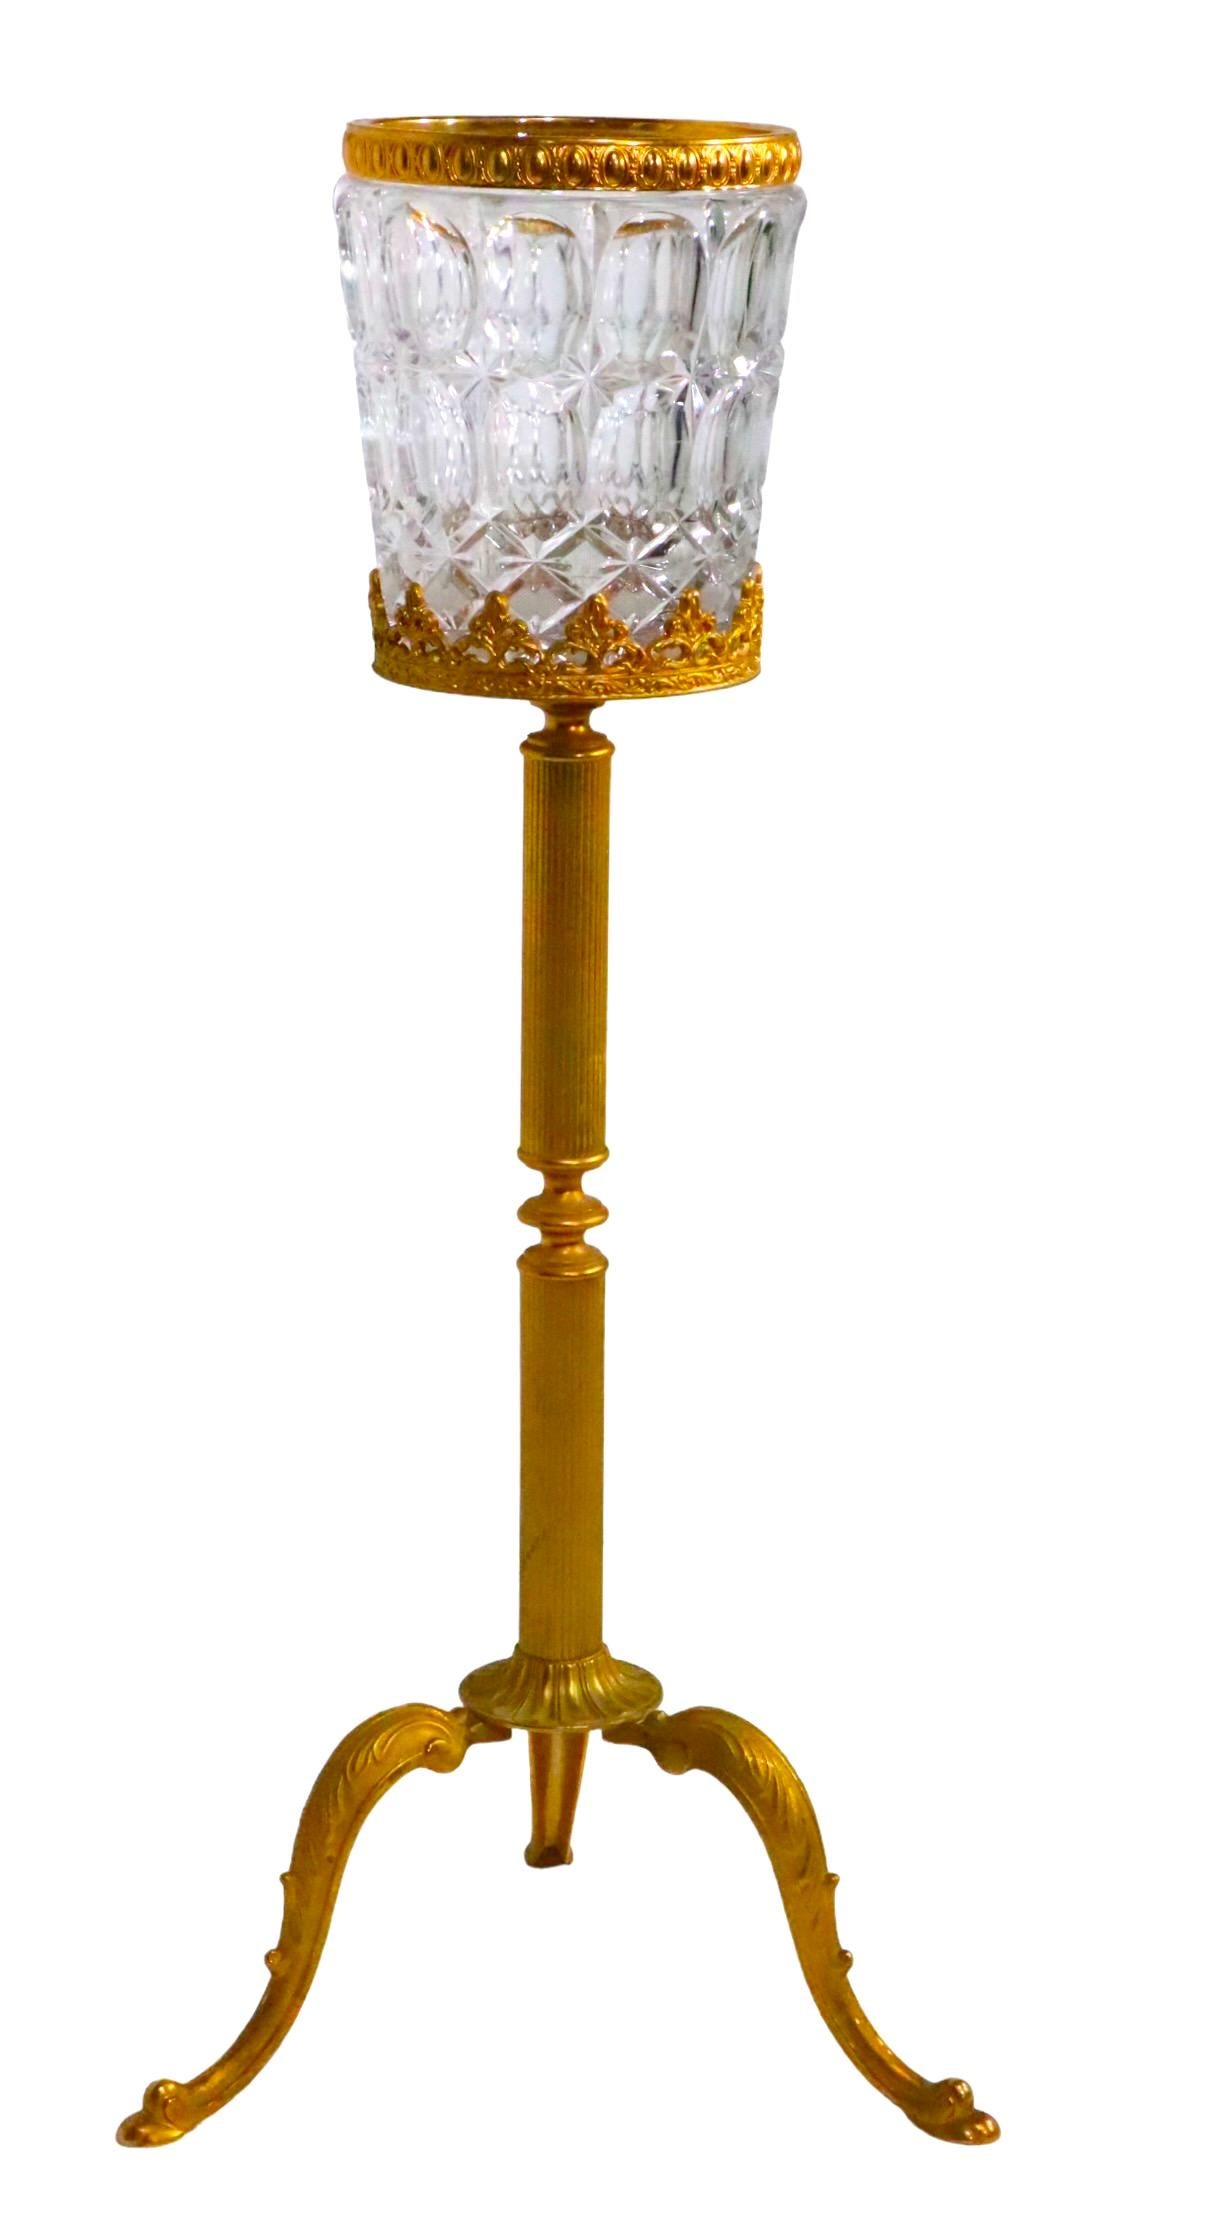   Hollywood Regency Faux Gold Gilt Brass Glass Champagne Wine Cooler with Stand  2